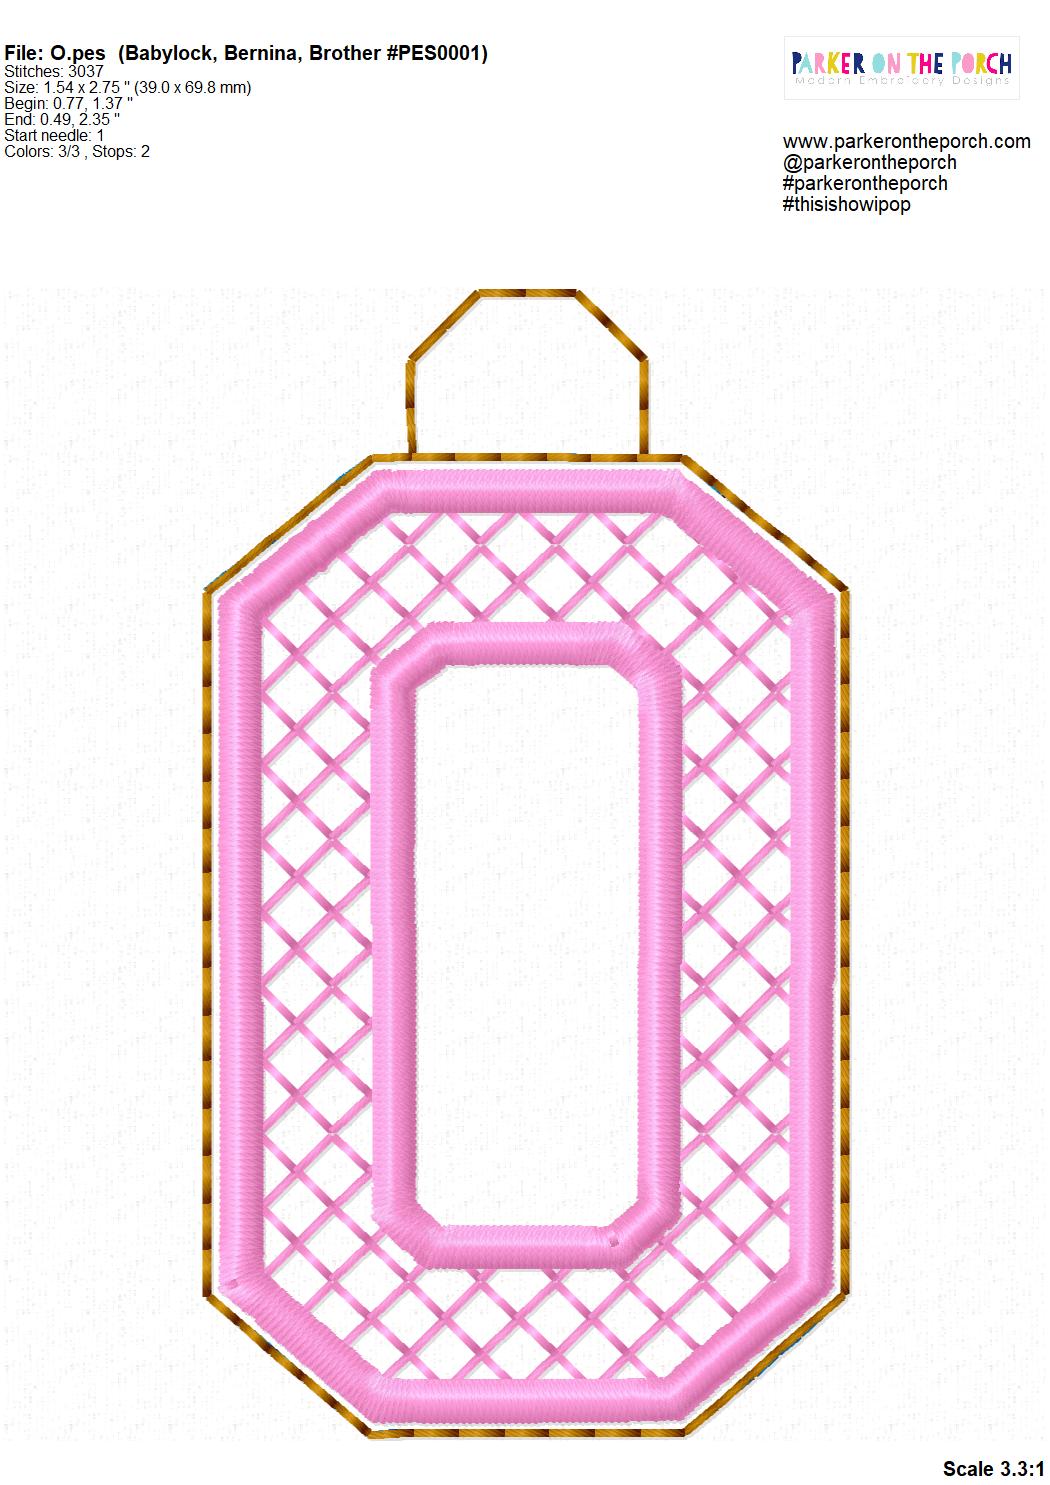 Louis Vuitton Dripping Logo Embroidery File Design Pattern Dst Pes